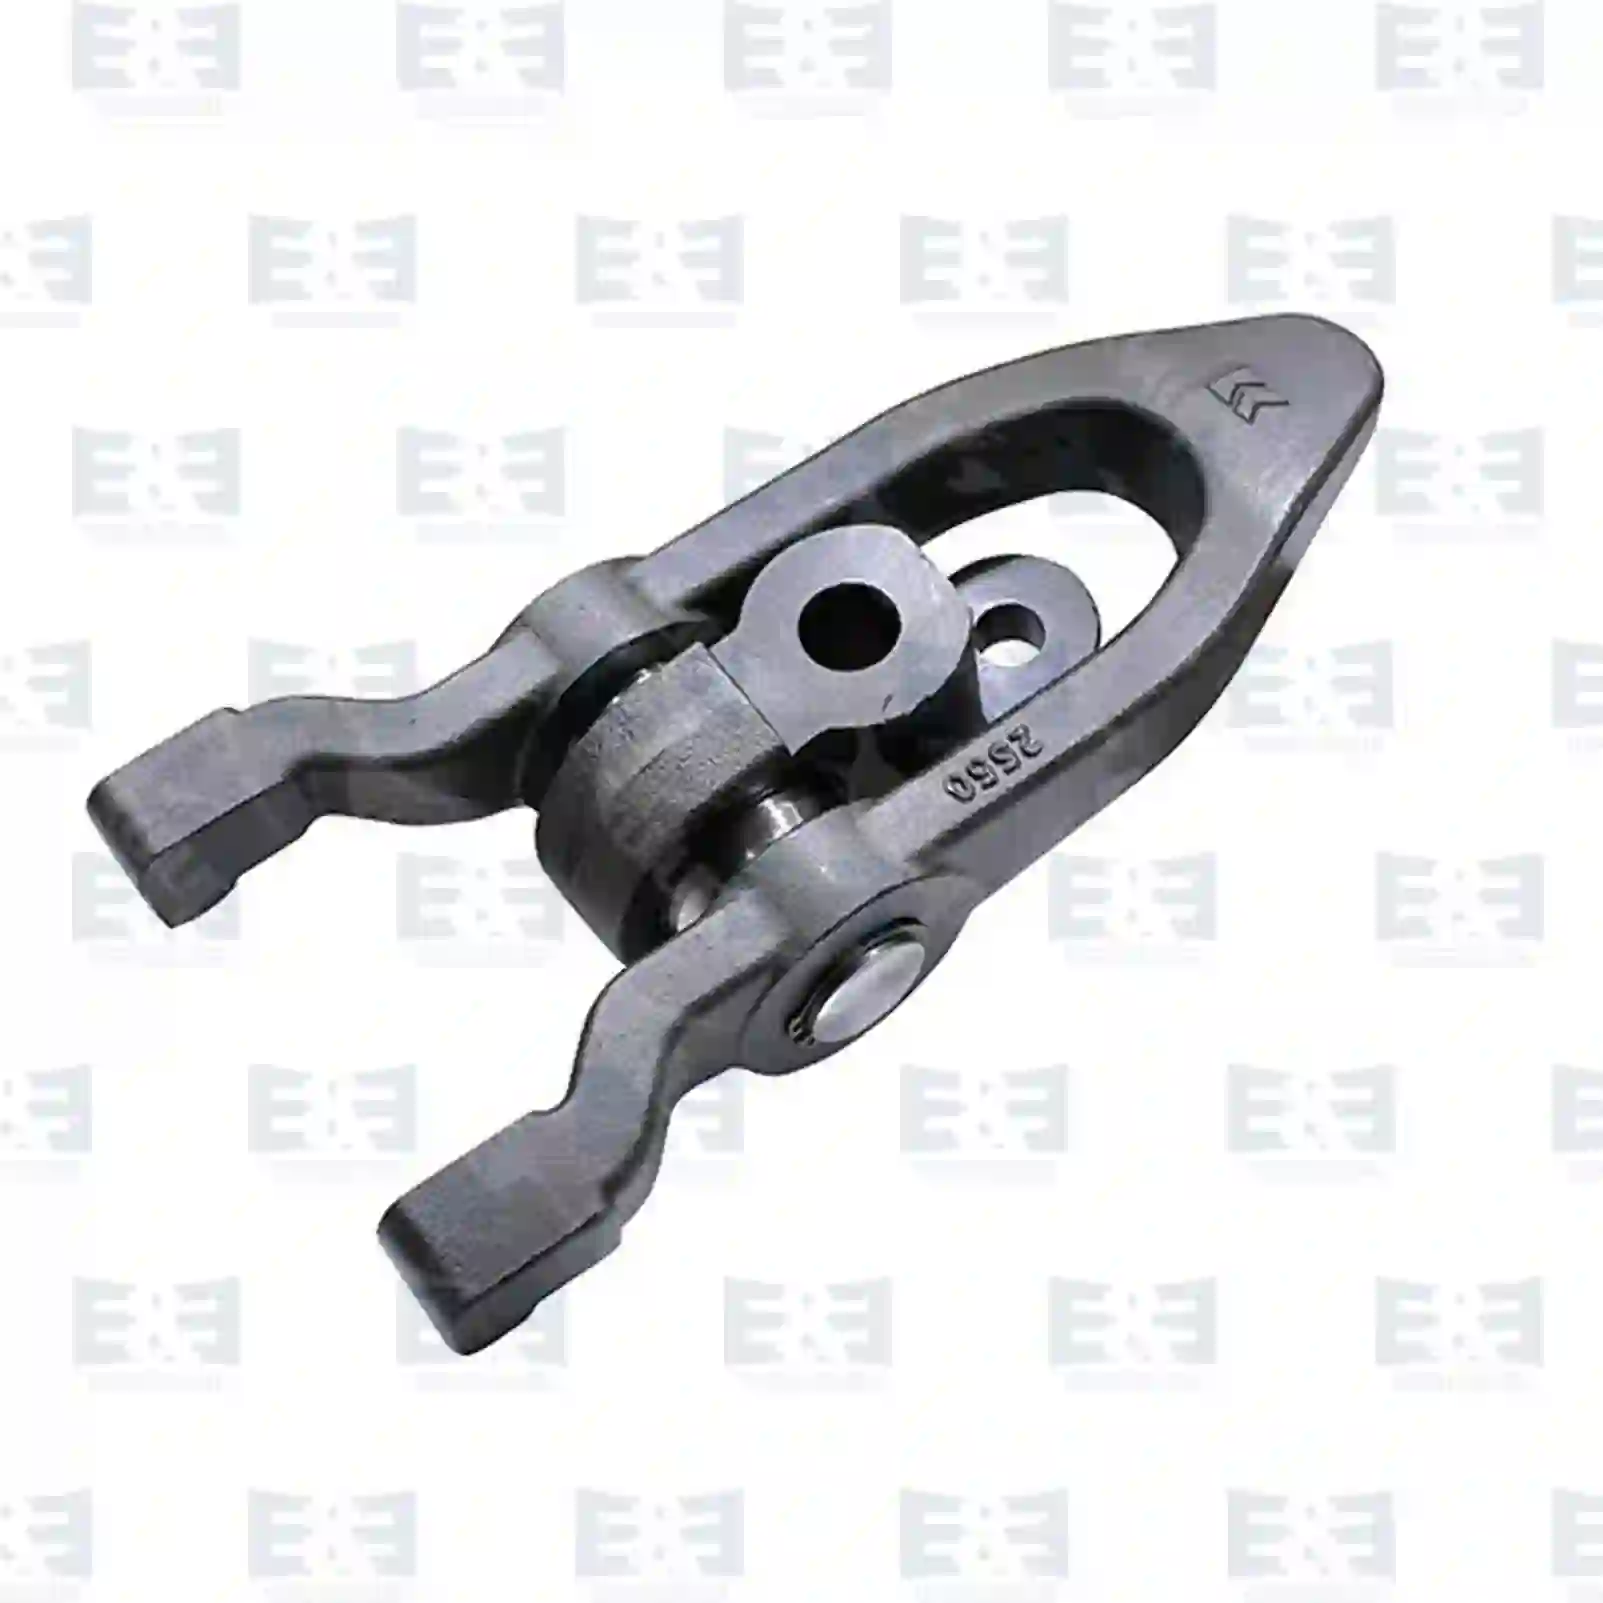 Release Lever Release fork, EE No 2E2289198 ,  oem no:1833859, 81324110006, 81324110007, 07W141719 E&E Truck Spare Parts | Truck Spare Parts, Auotomotive Spare Parts